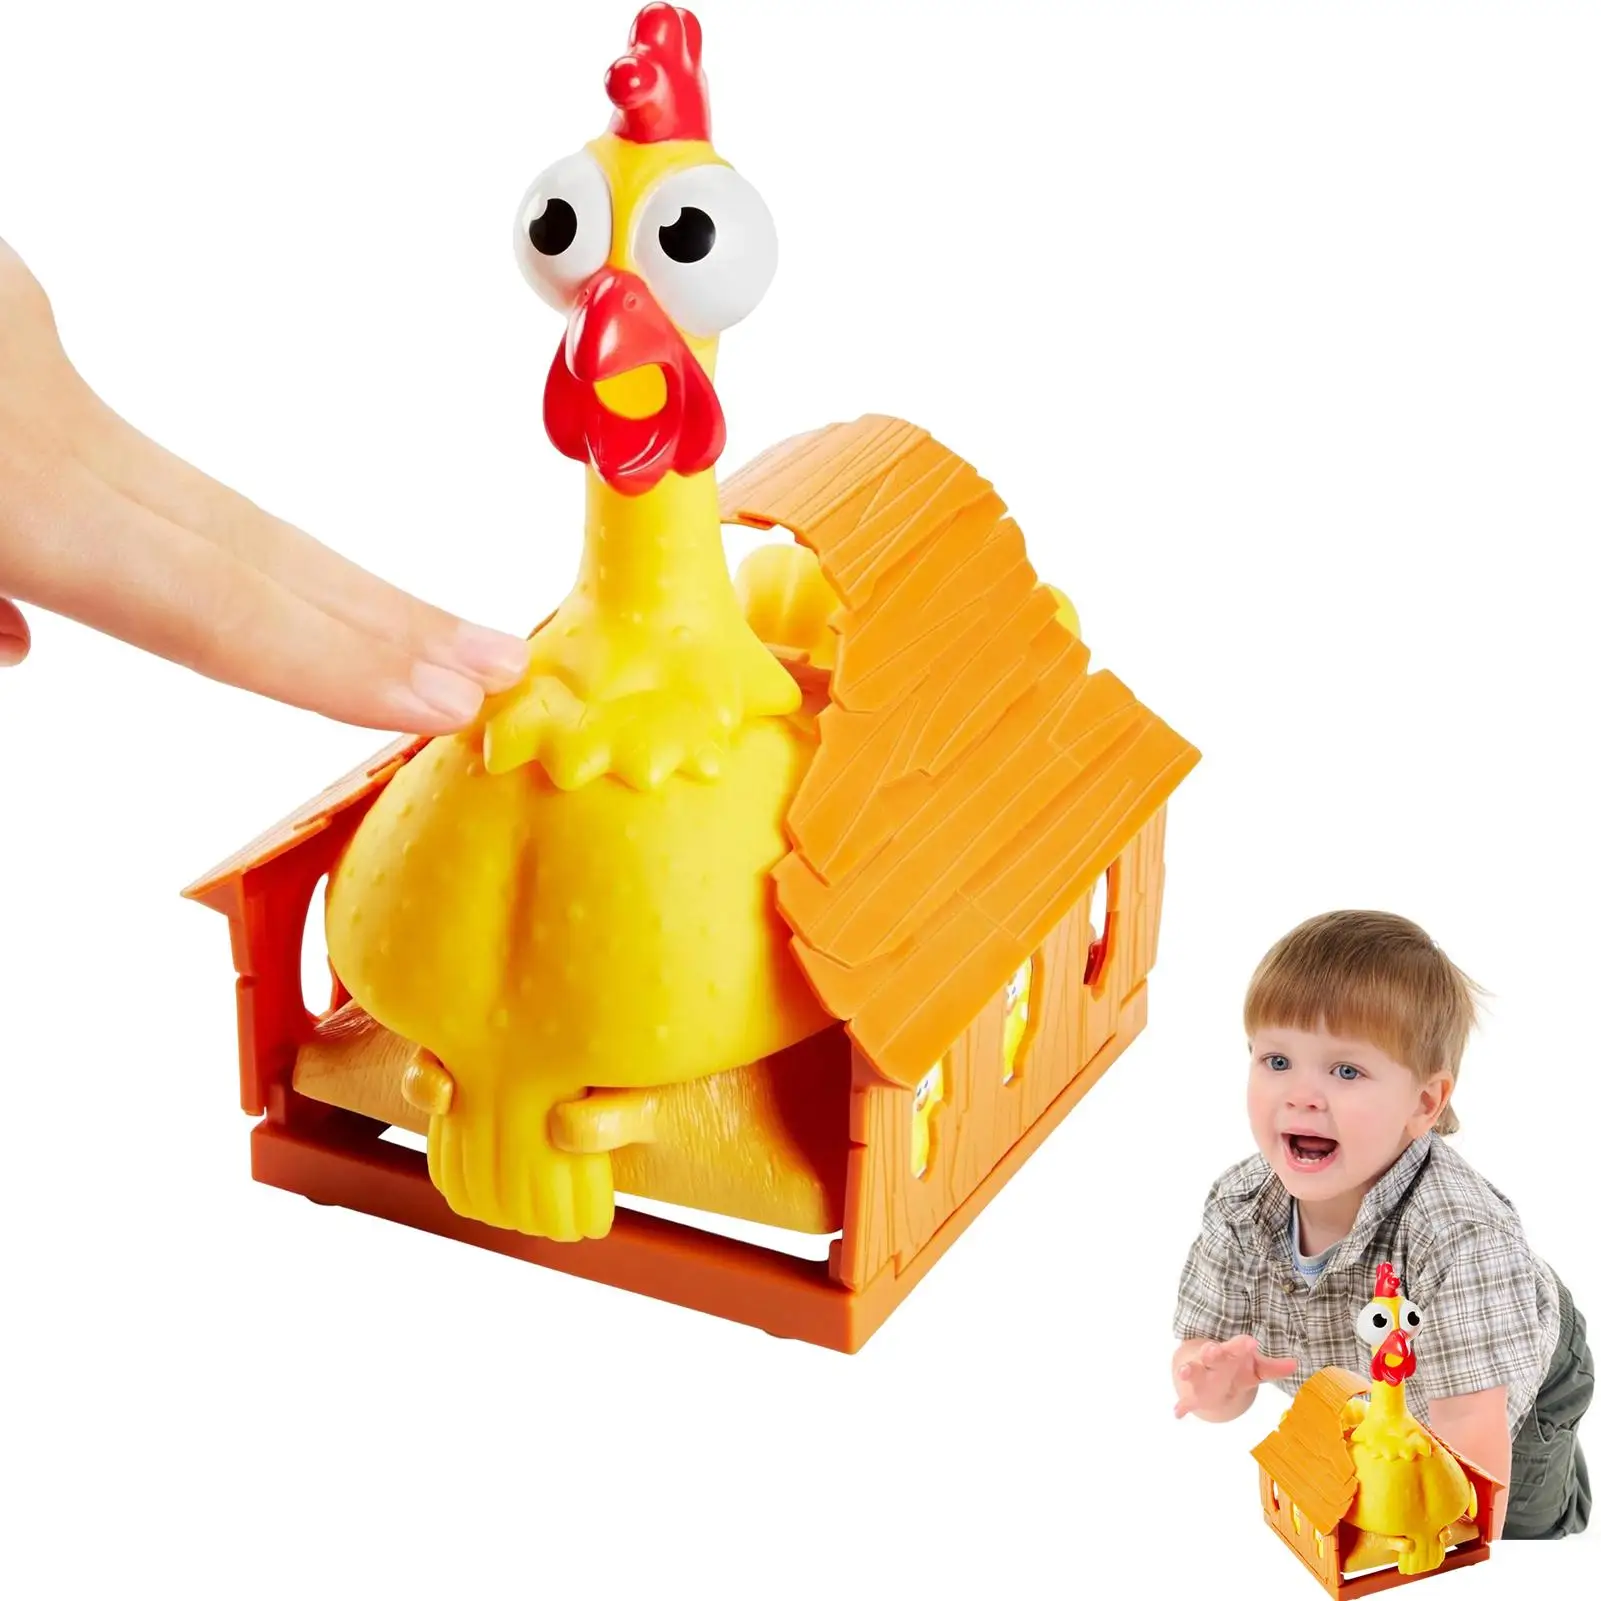 

Tabletop Game Funny Spoof Tricky Gadgets Toy Chicken Egg Laying Hens Crowded Stress Gift Educational Children's Toys Joke Toy